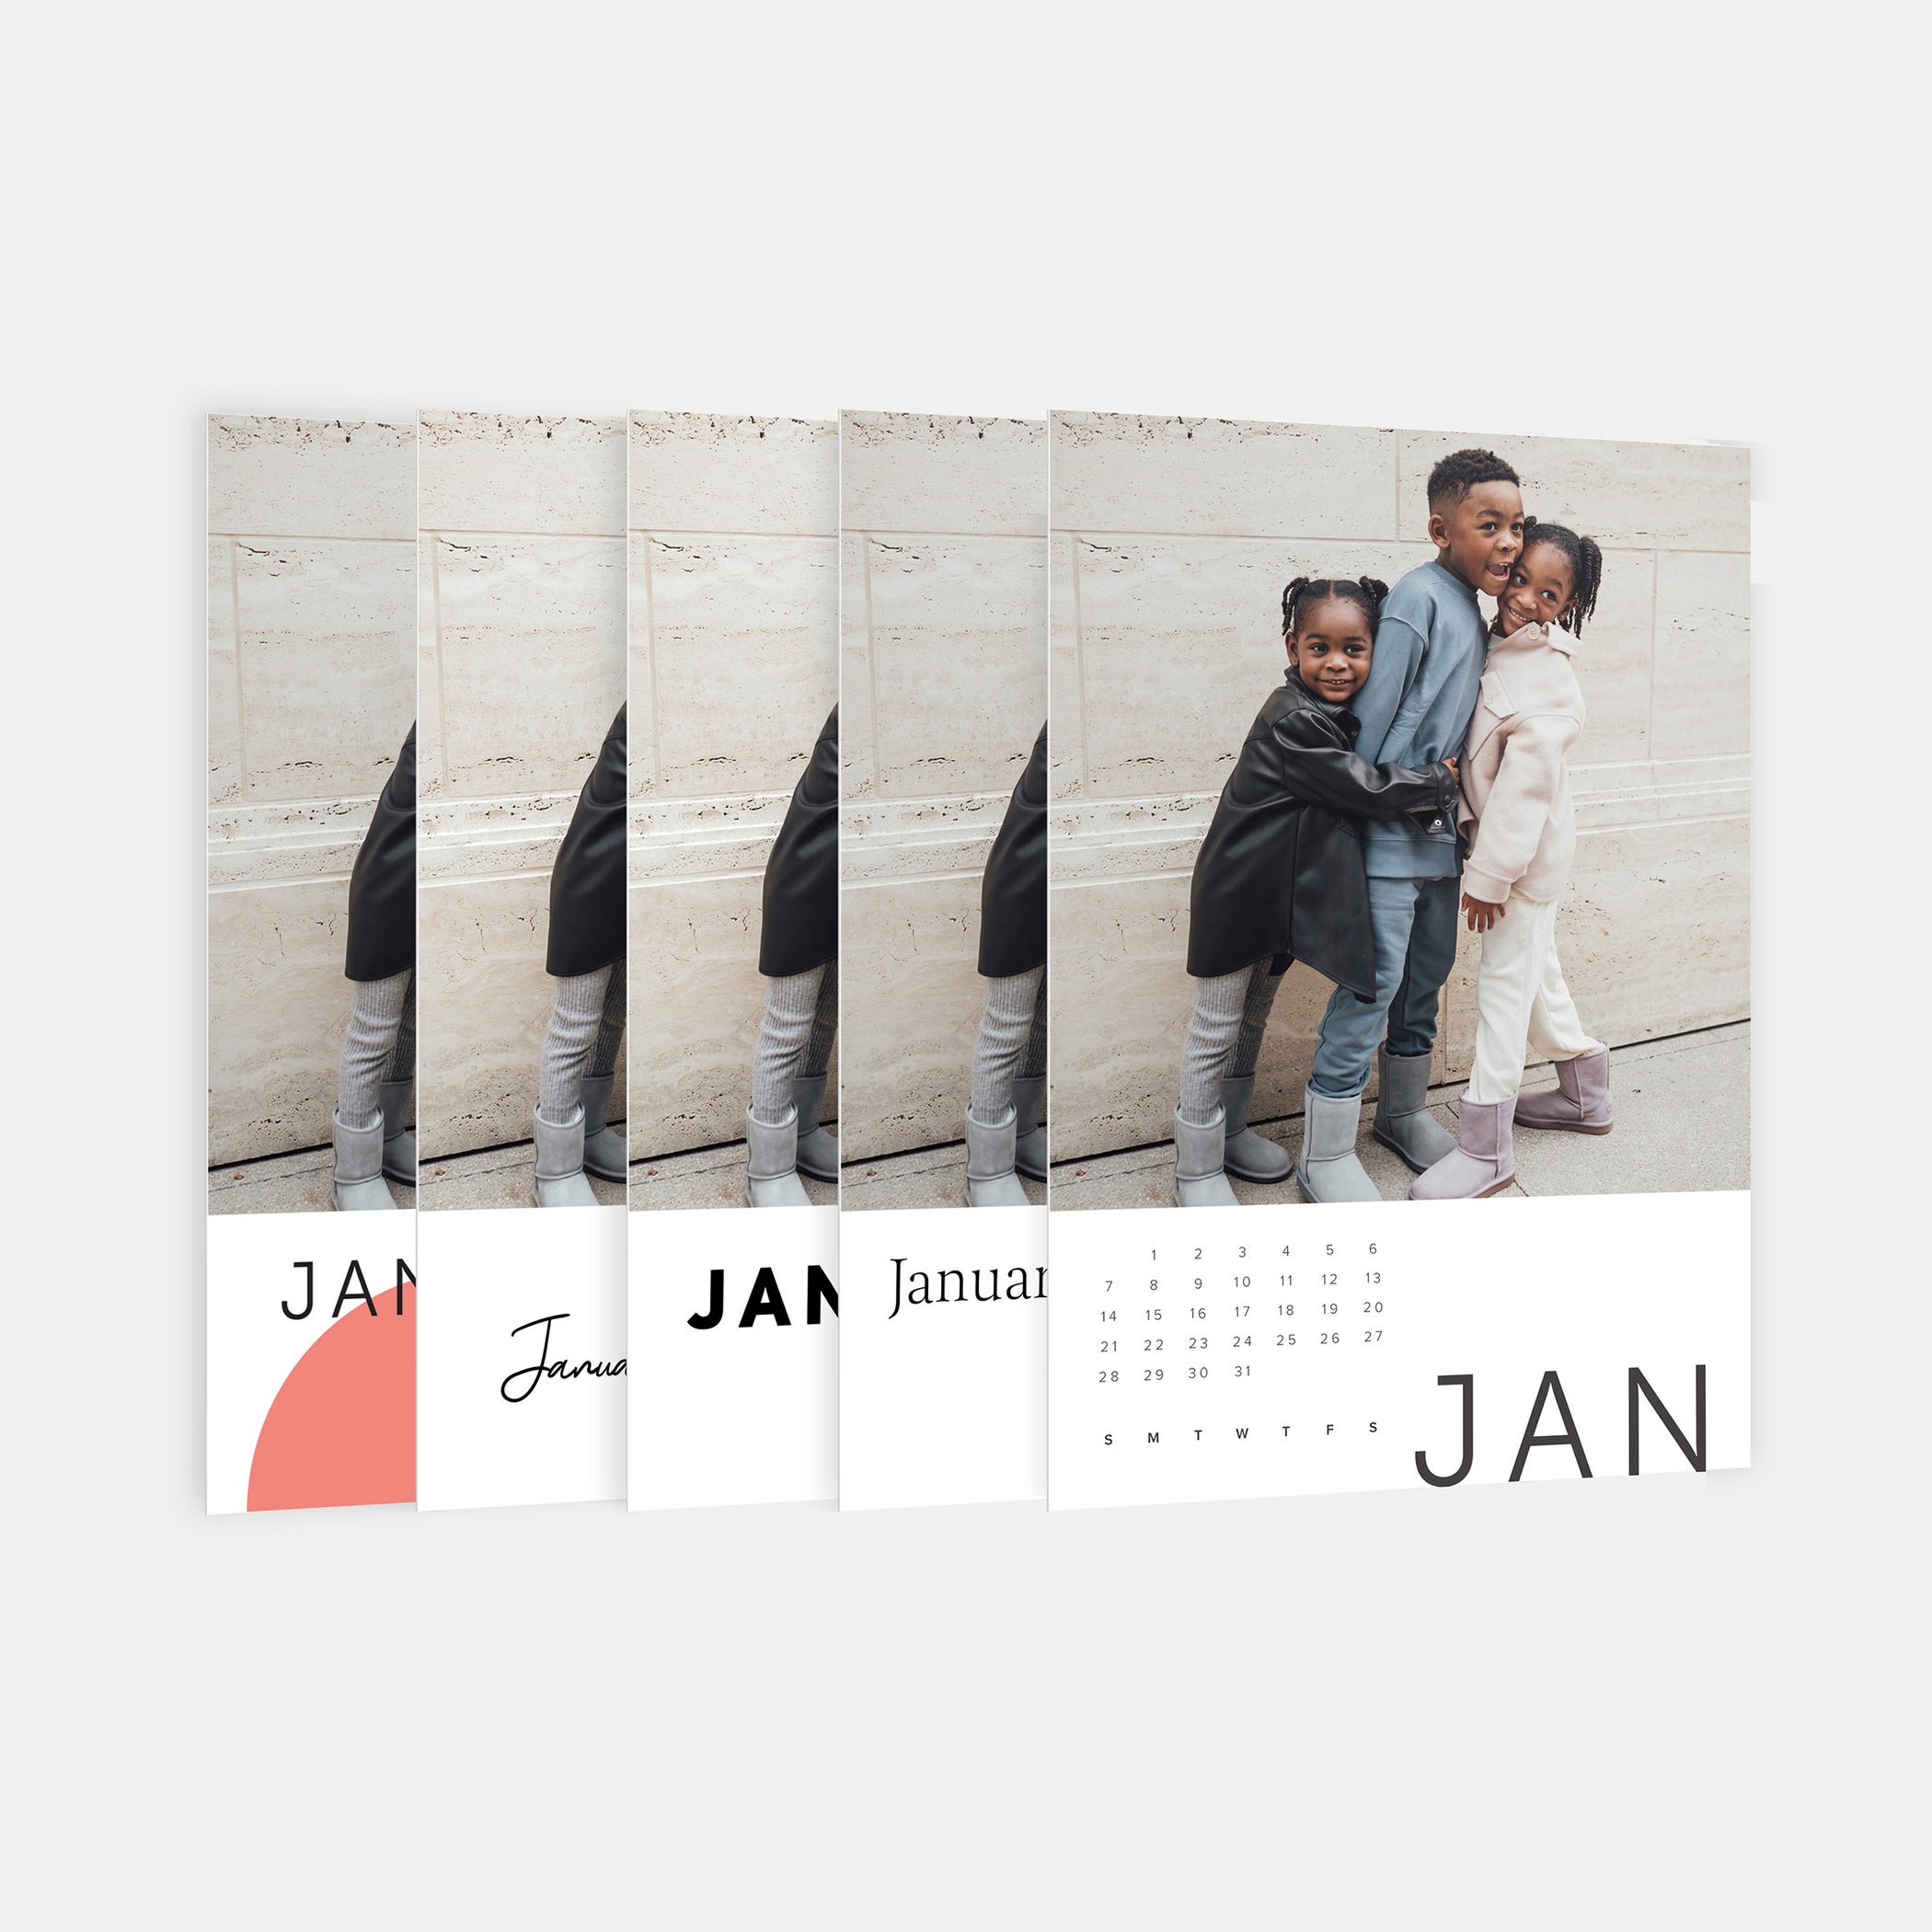 Digital Scrapbook Pack, January Calendar Journal Cards Kit by Connection  Keeping